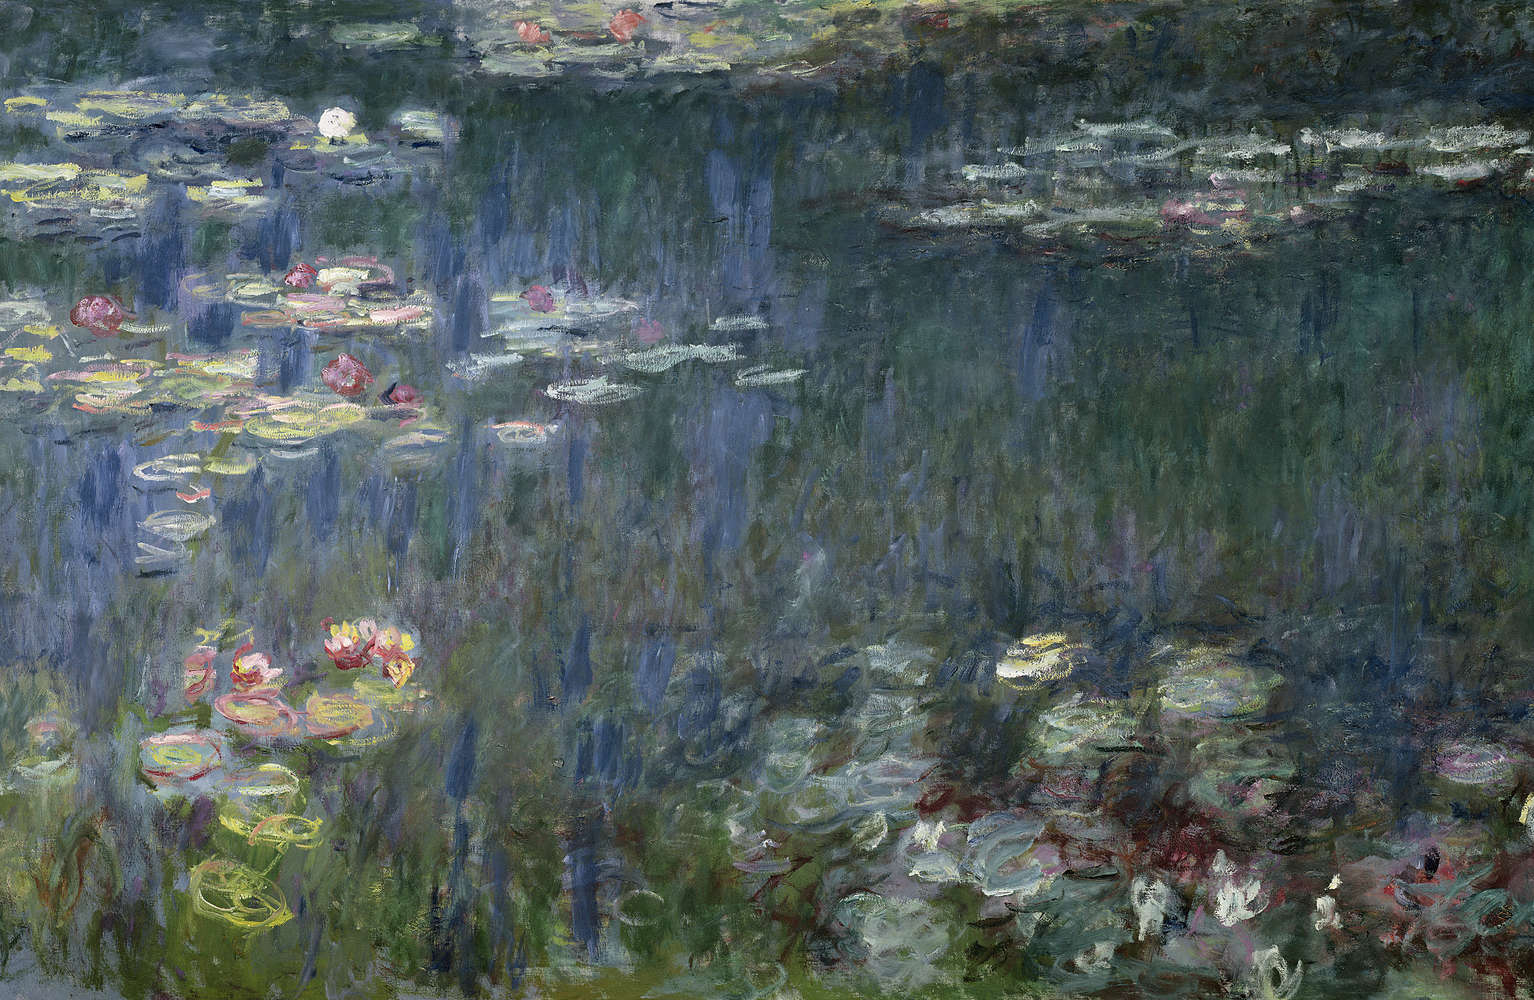             Water Lilies: Green Reflections mural by Claude Monet
        